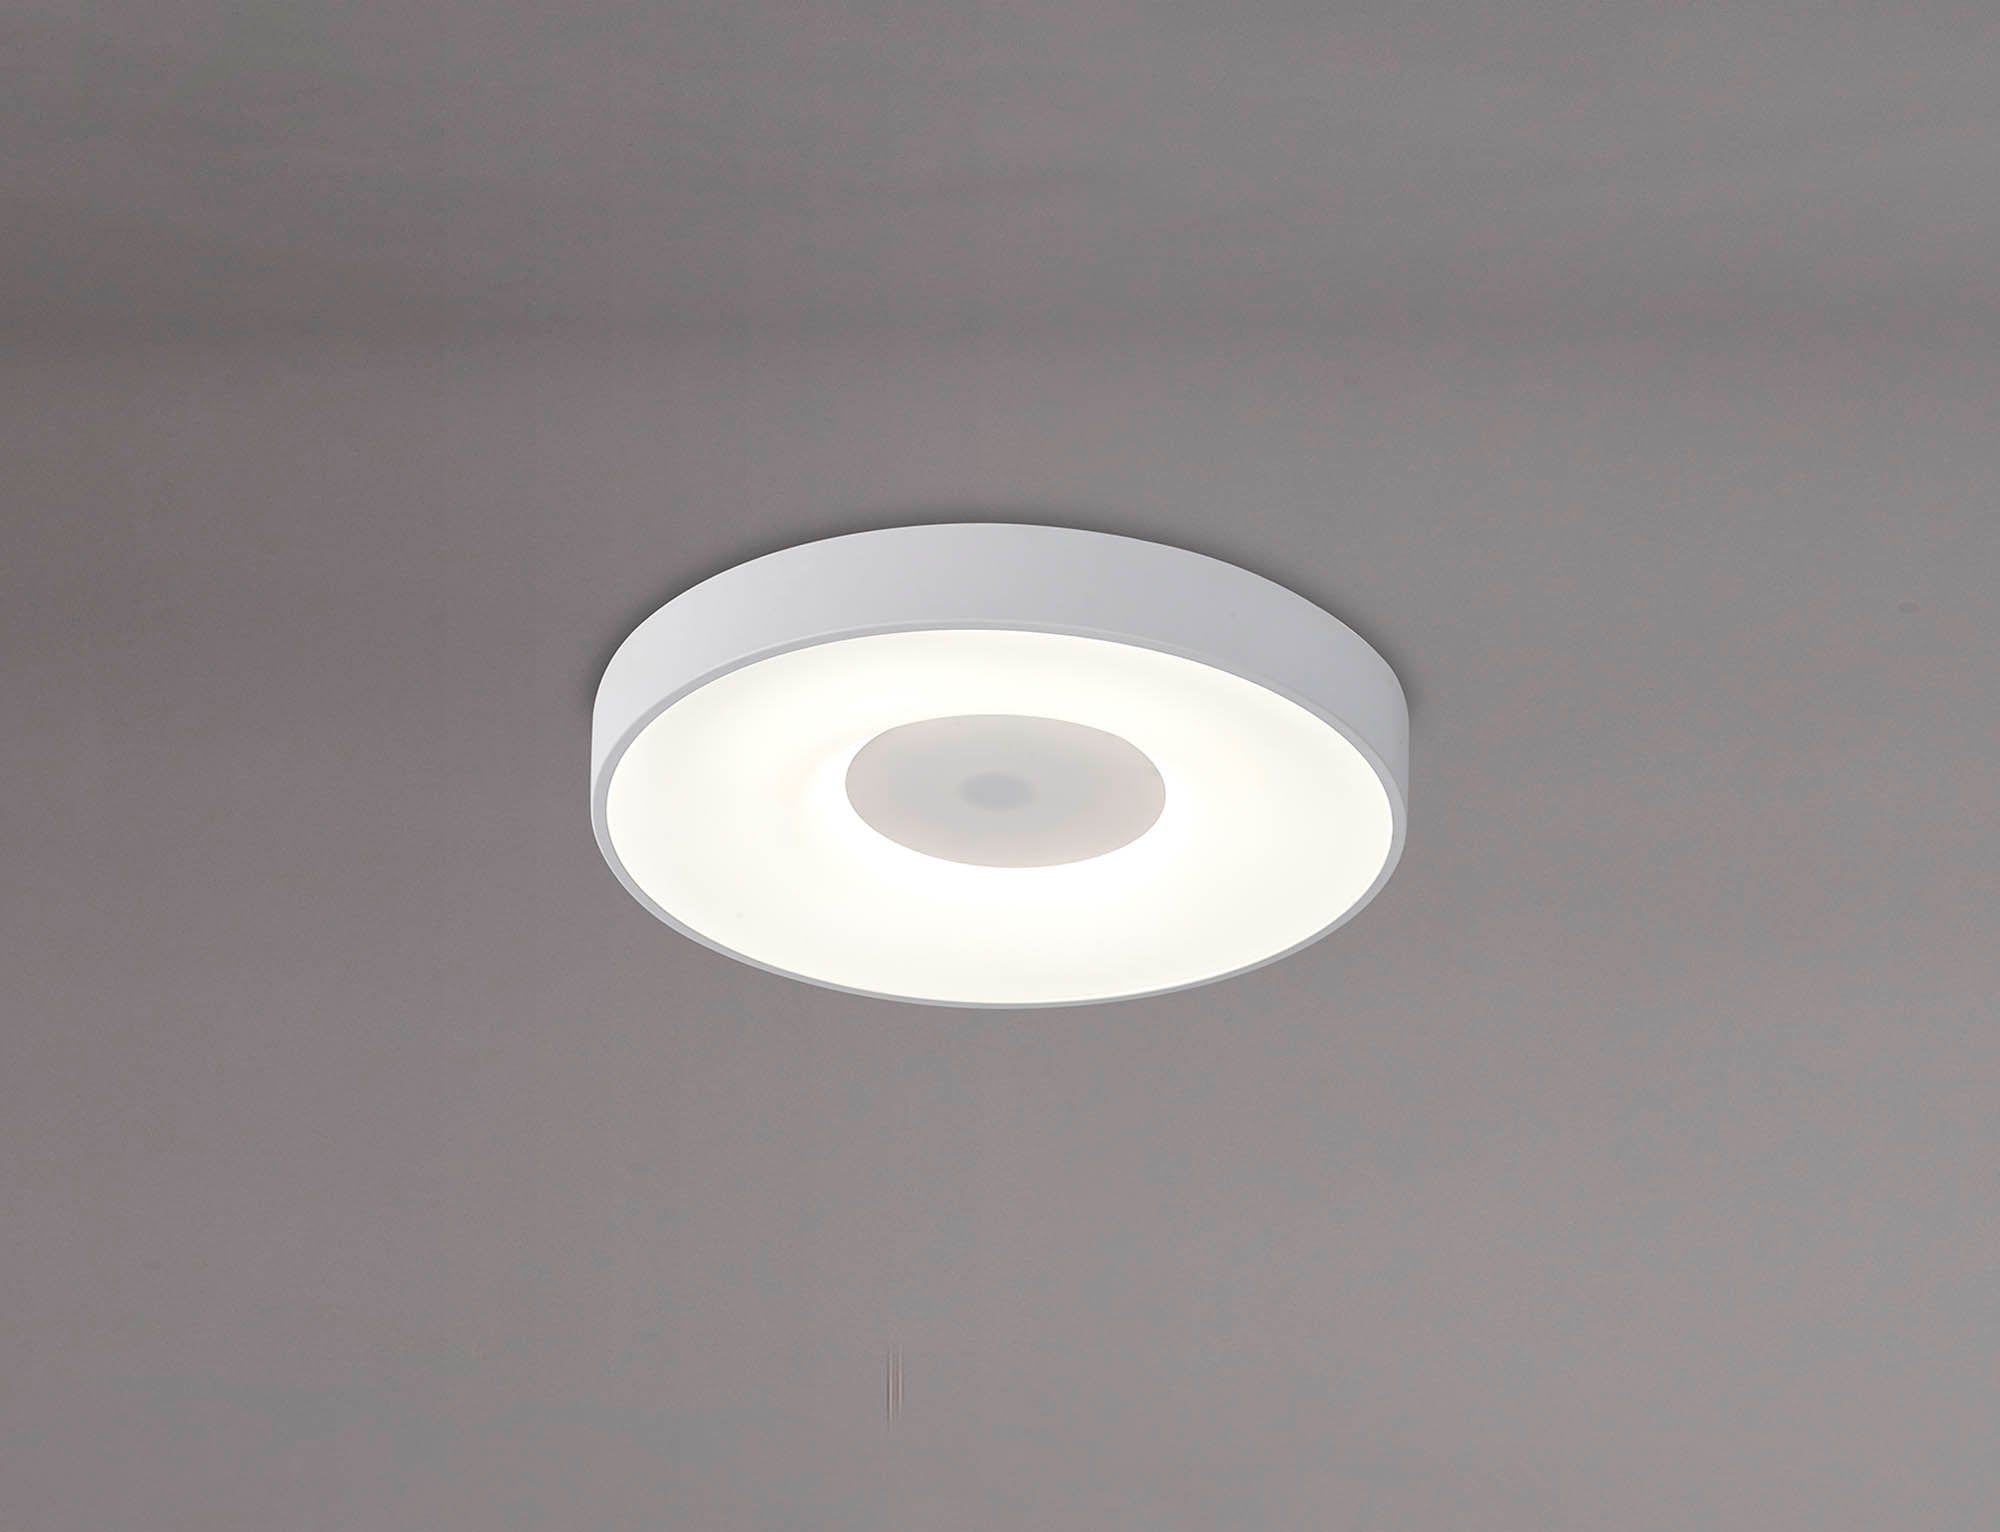 Coin Round Ceiling 56W LED With Remote Control 2700K-5000K, 2500lm, White, 3yrs Warranty